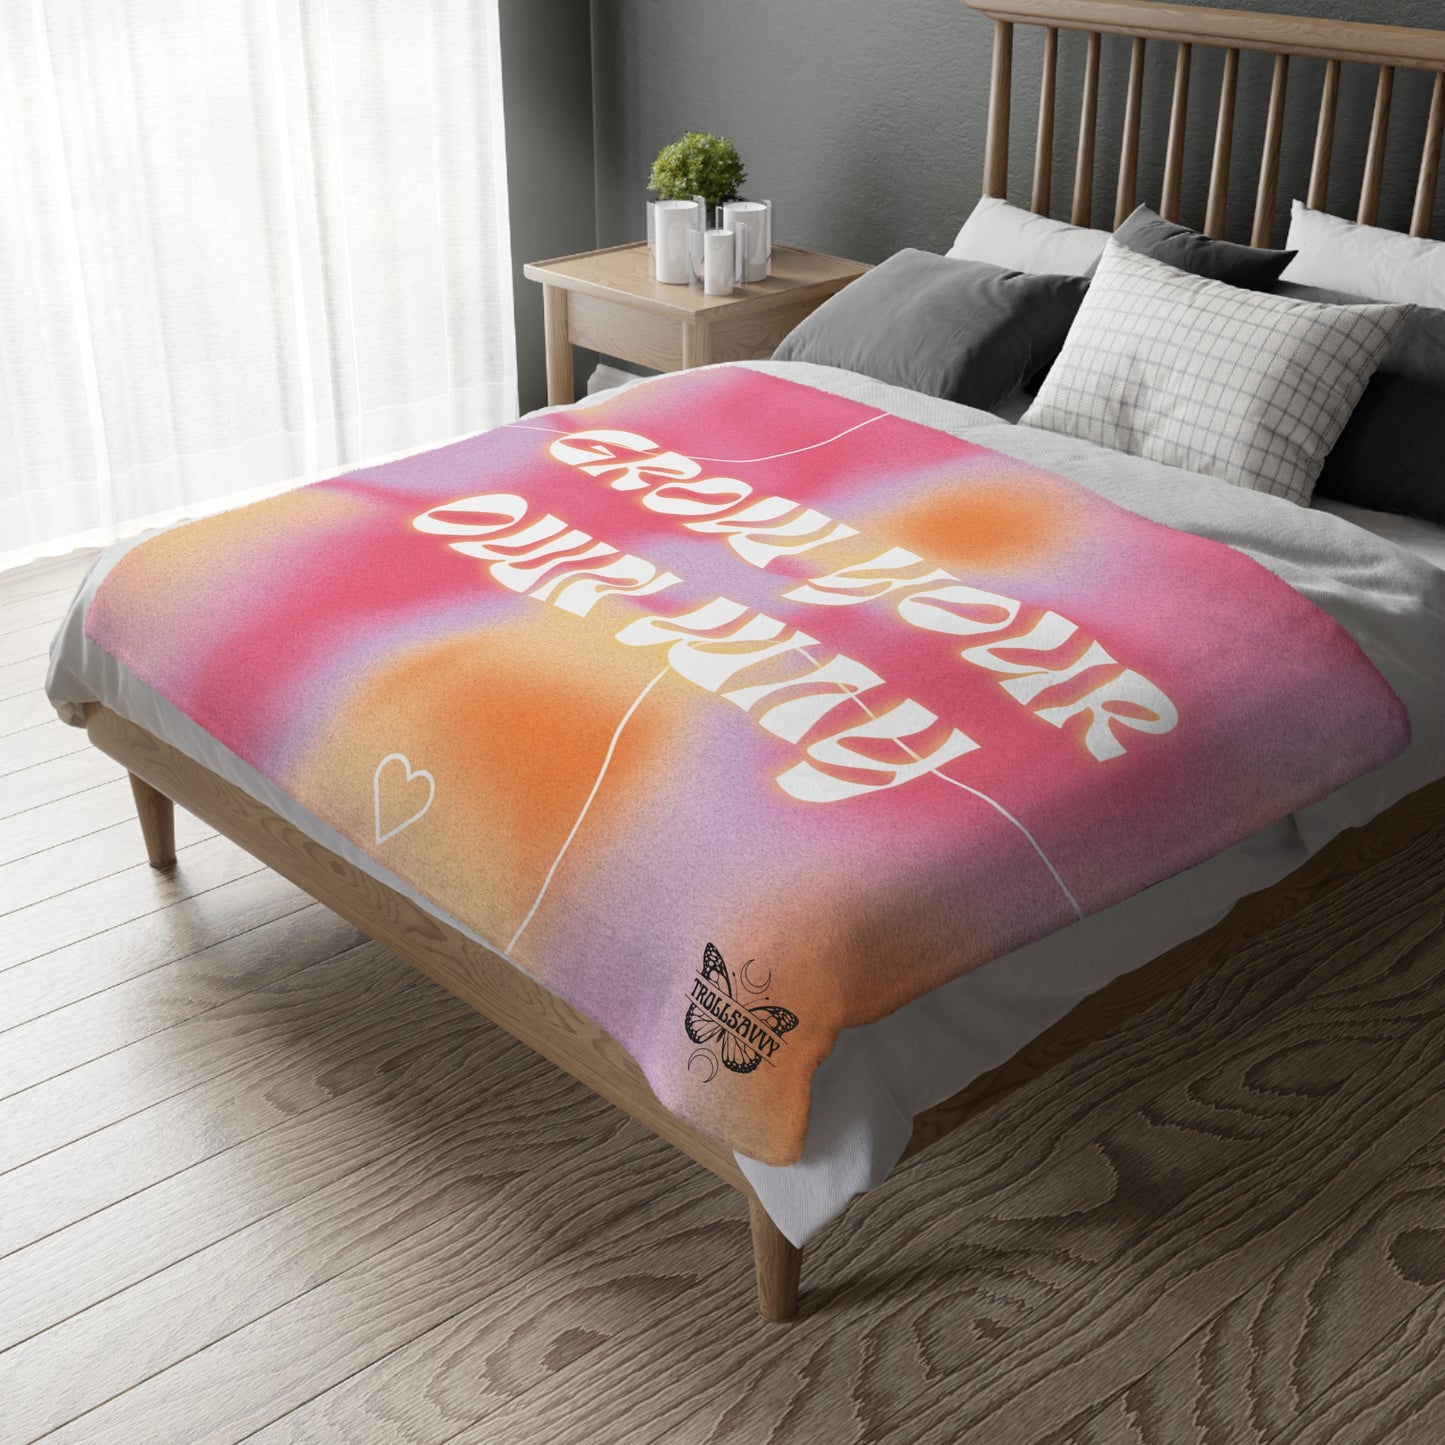 Grow Your Own Way Double-Sided Mantra Blanket